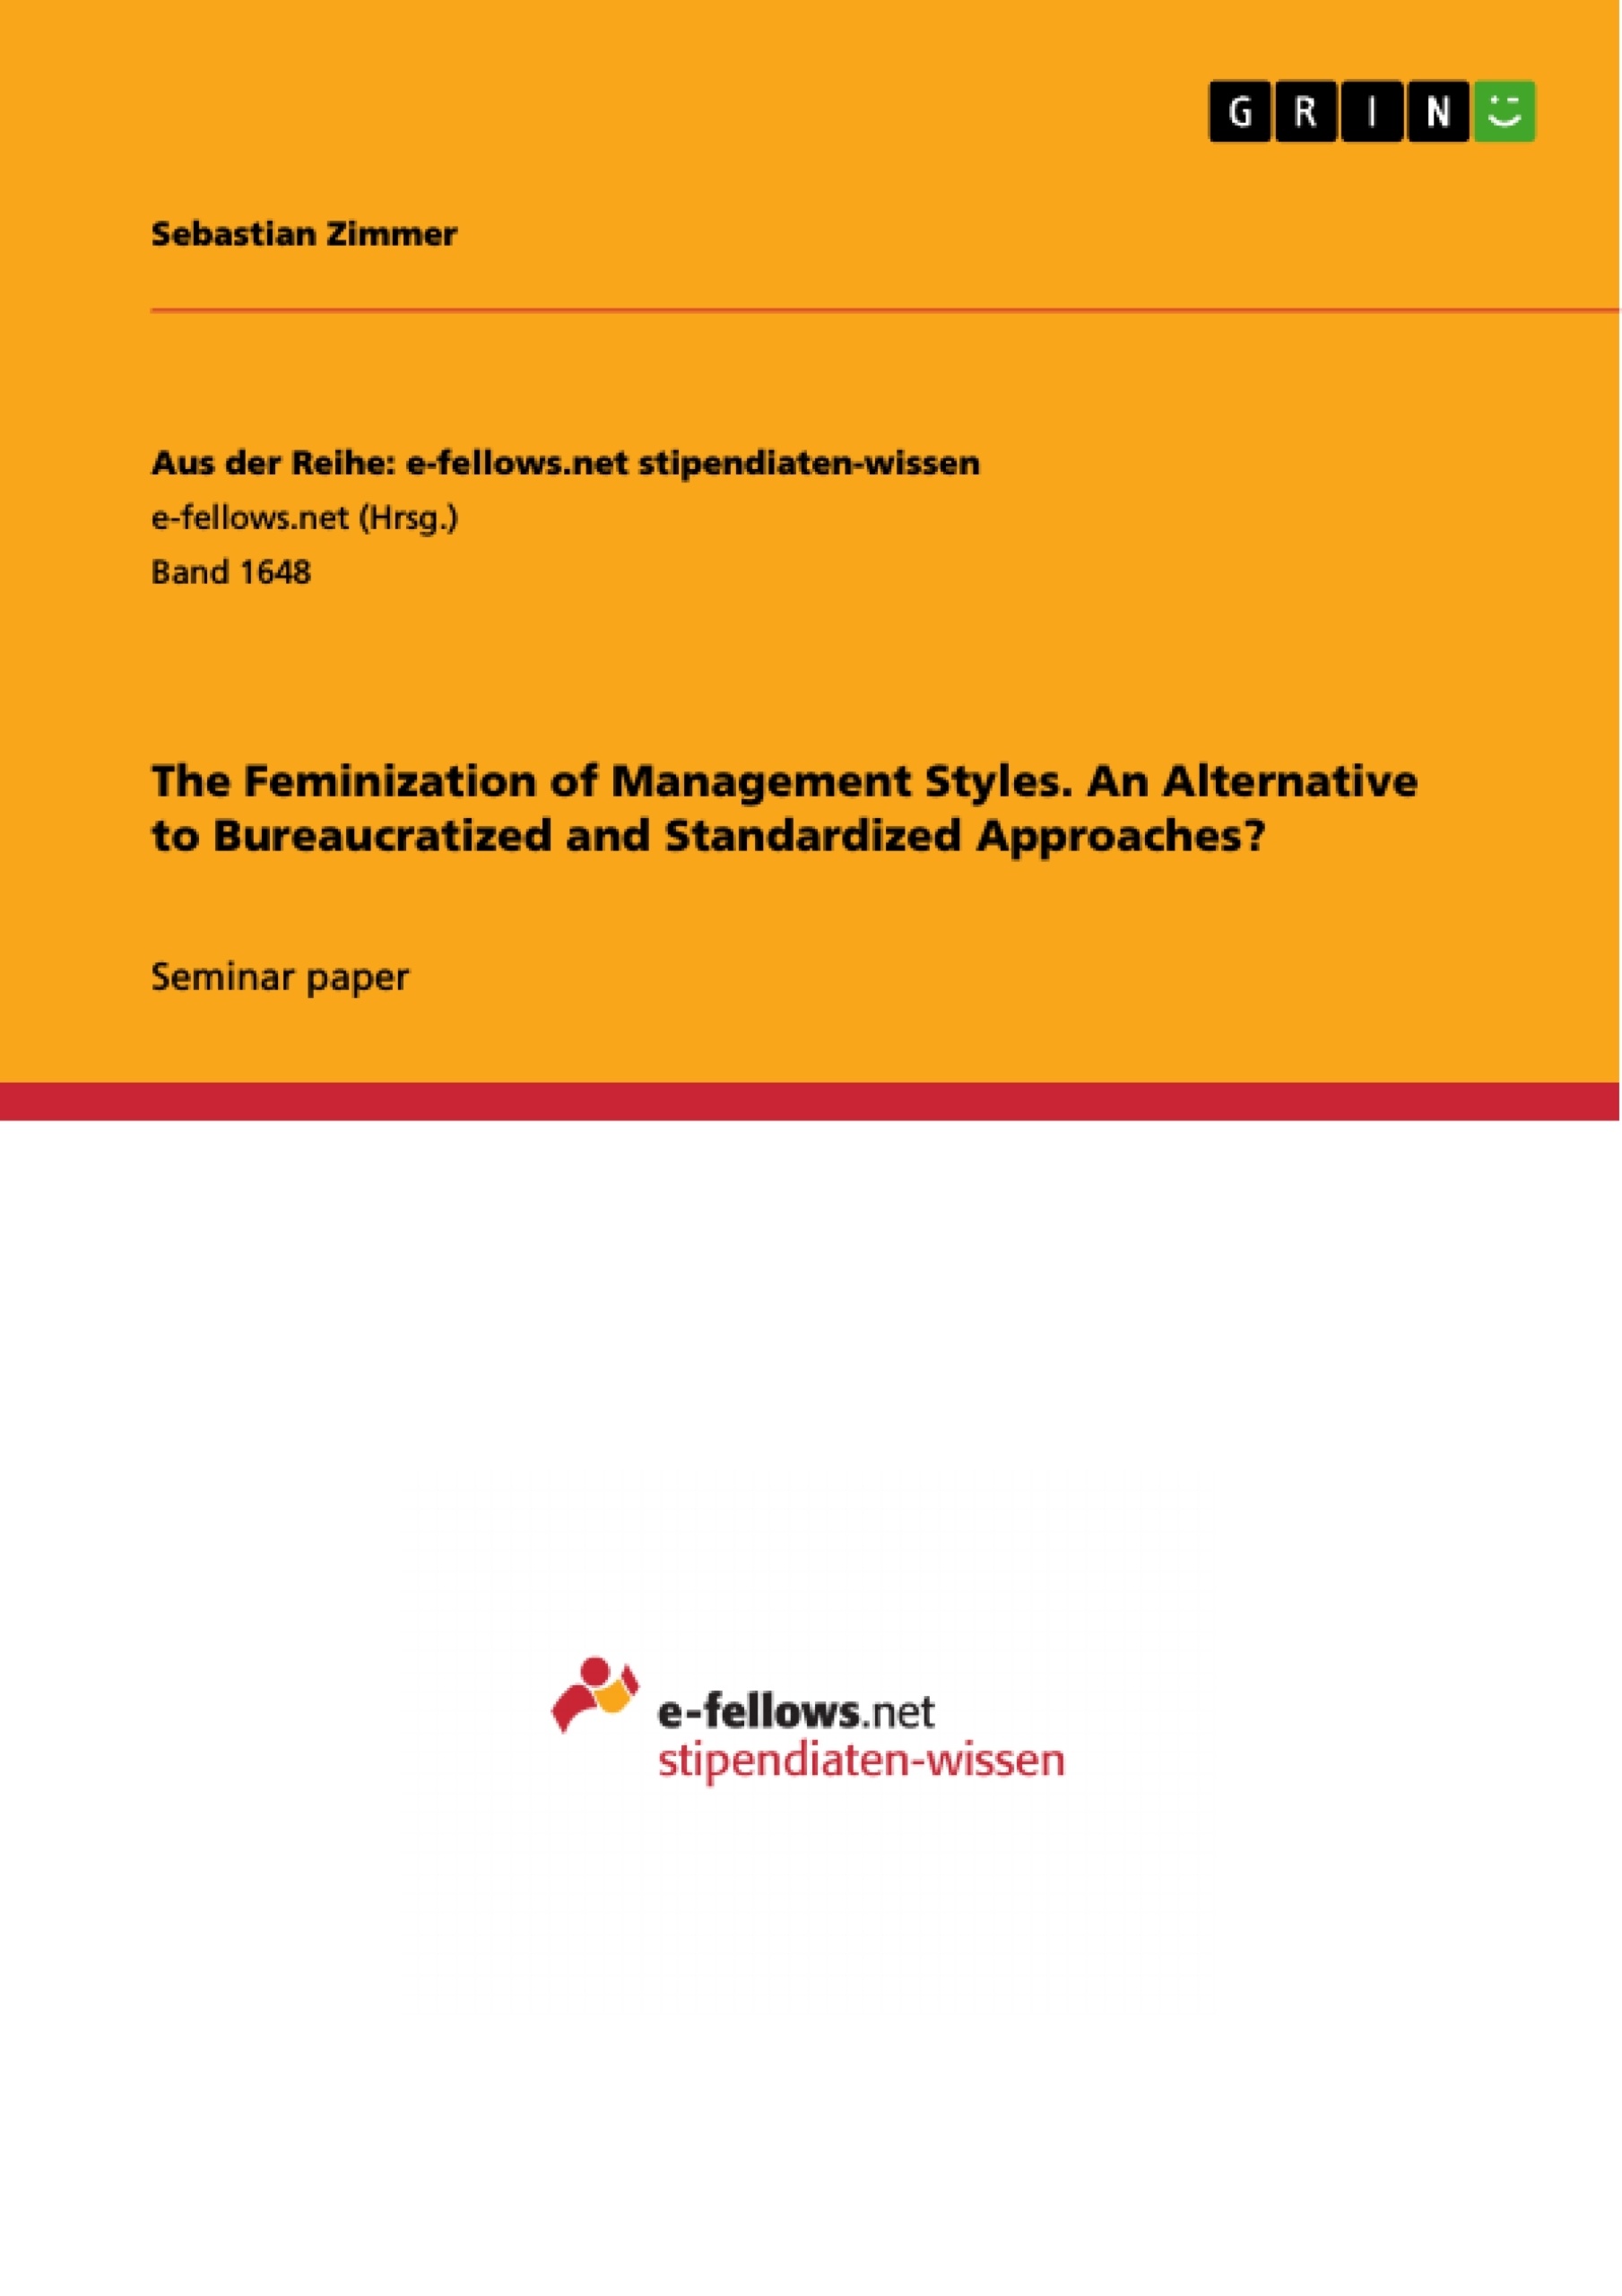 Title: The Feminization of Management Styles. An Alternative to Bureaucratized and Standardized Approaches?